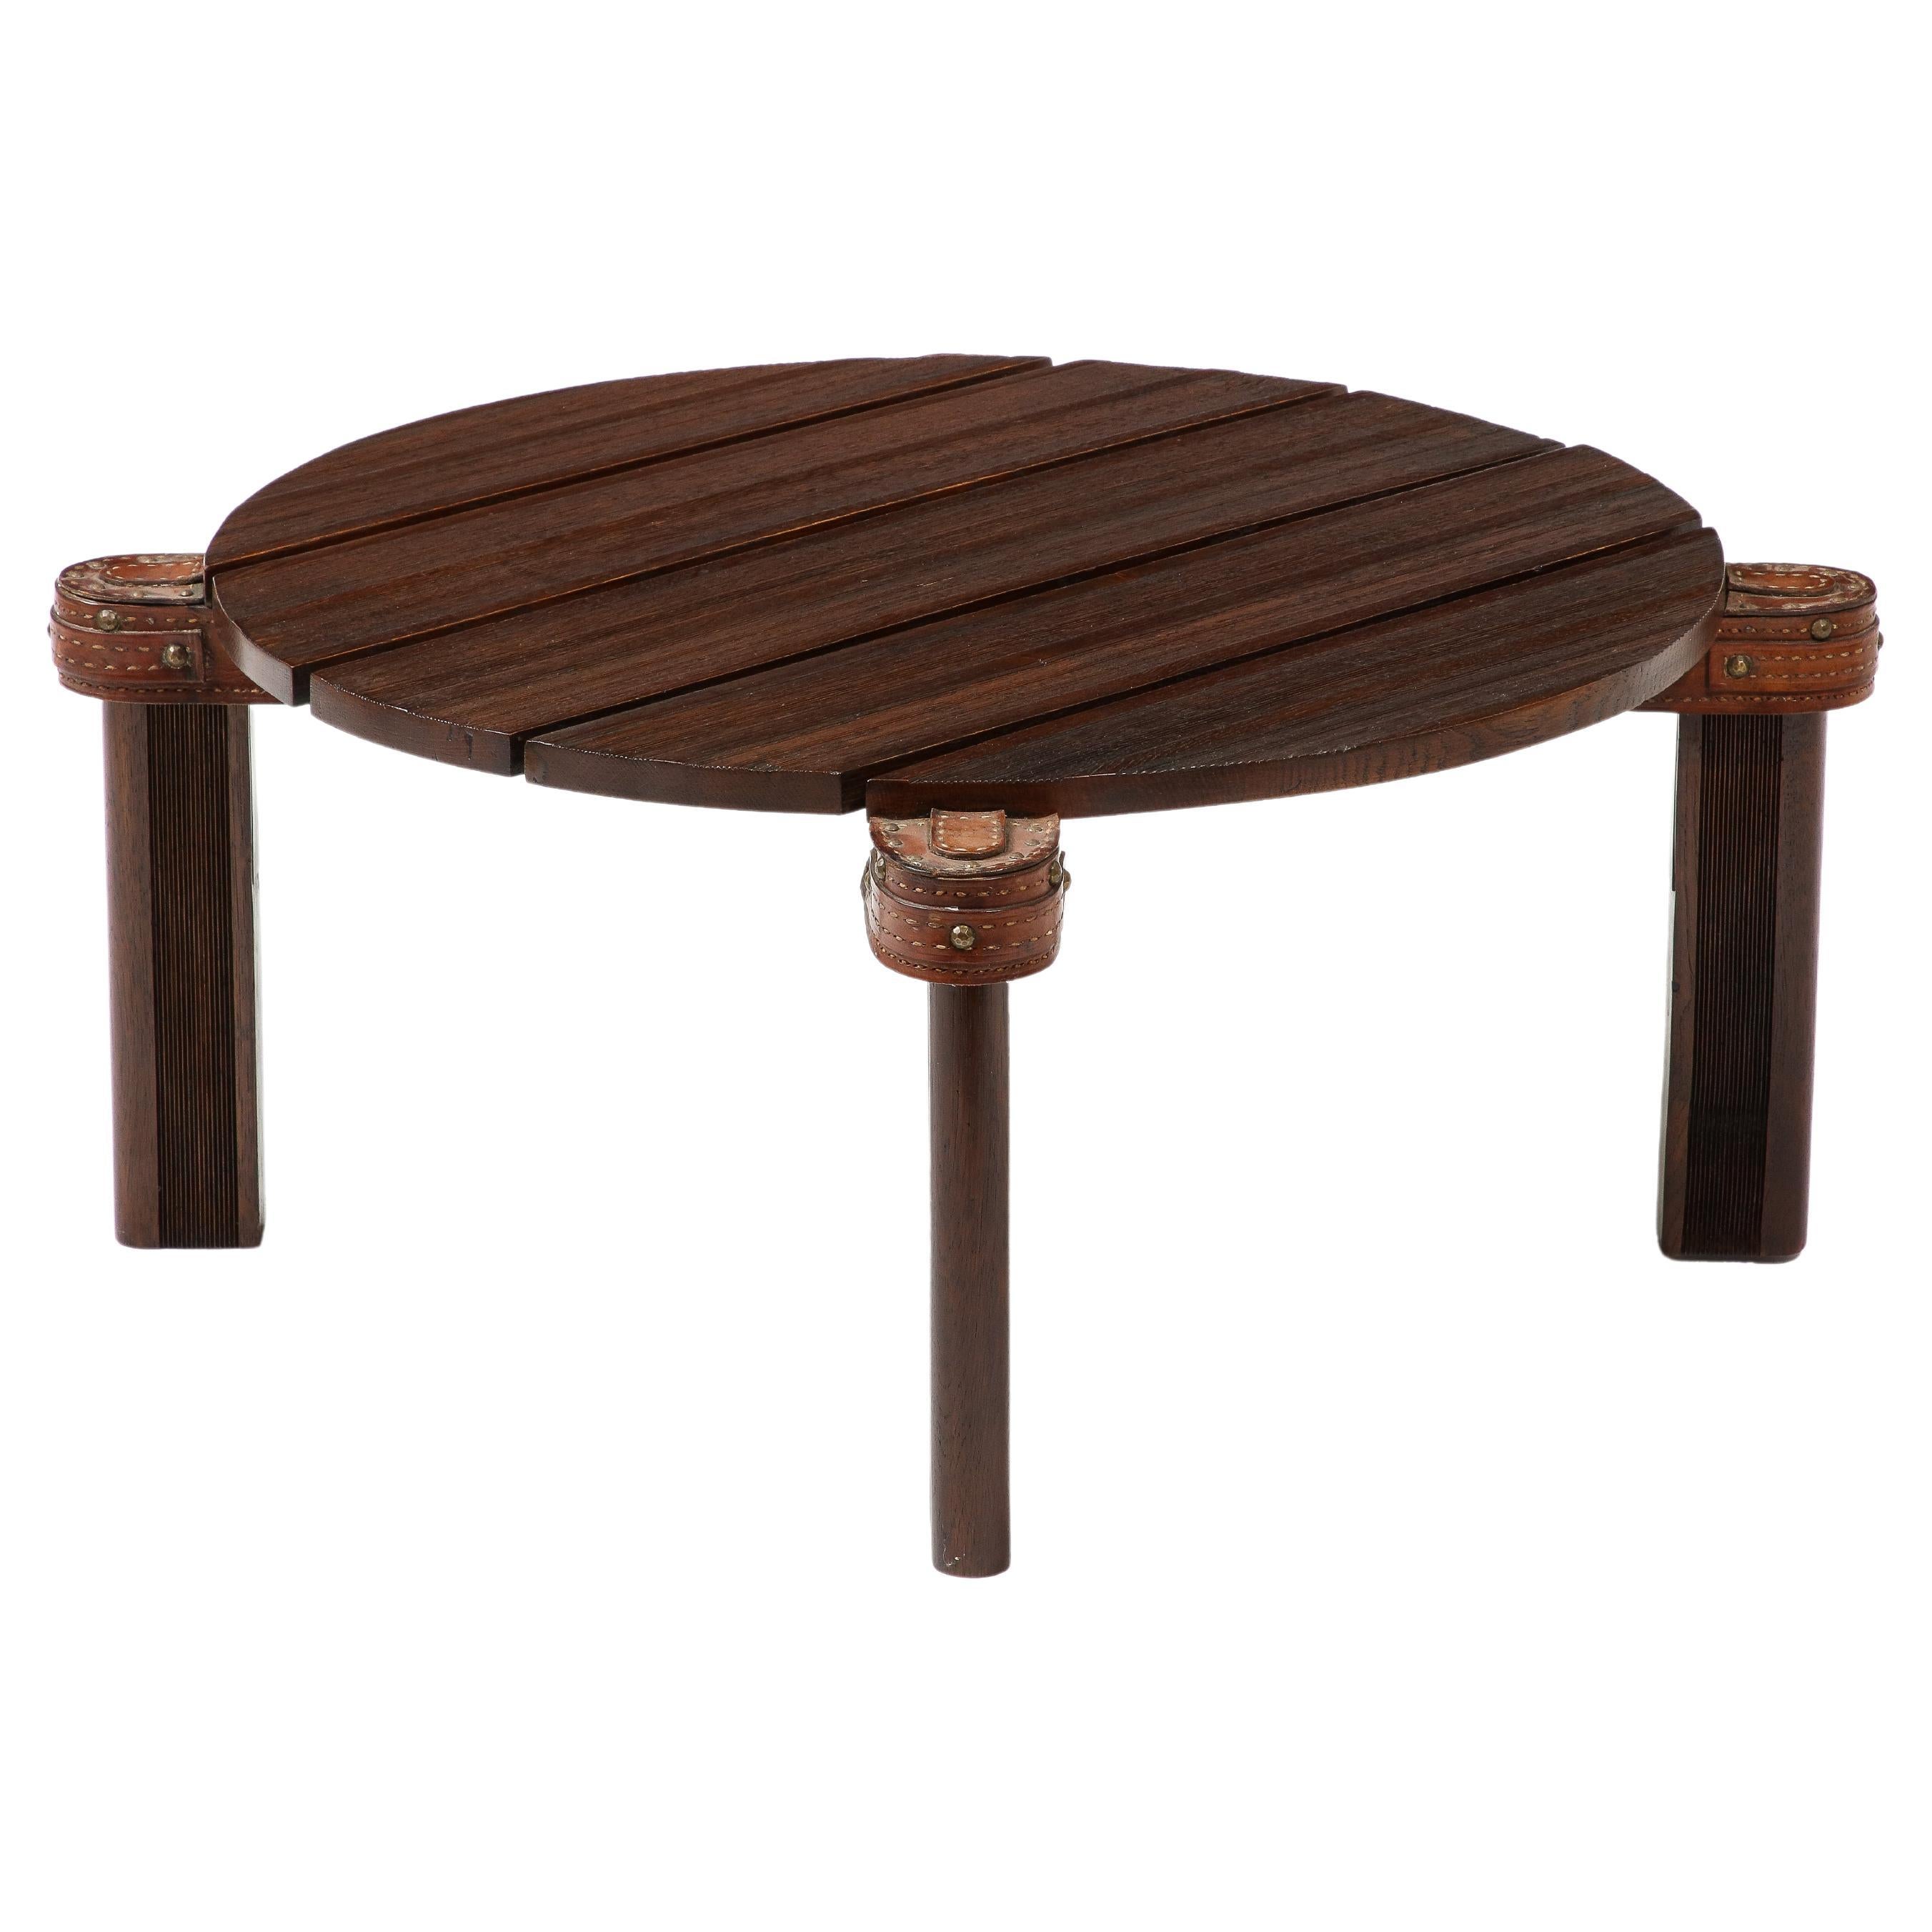 Elegant reeded table by Jacques Adnet with leather and brass nail details.